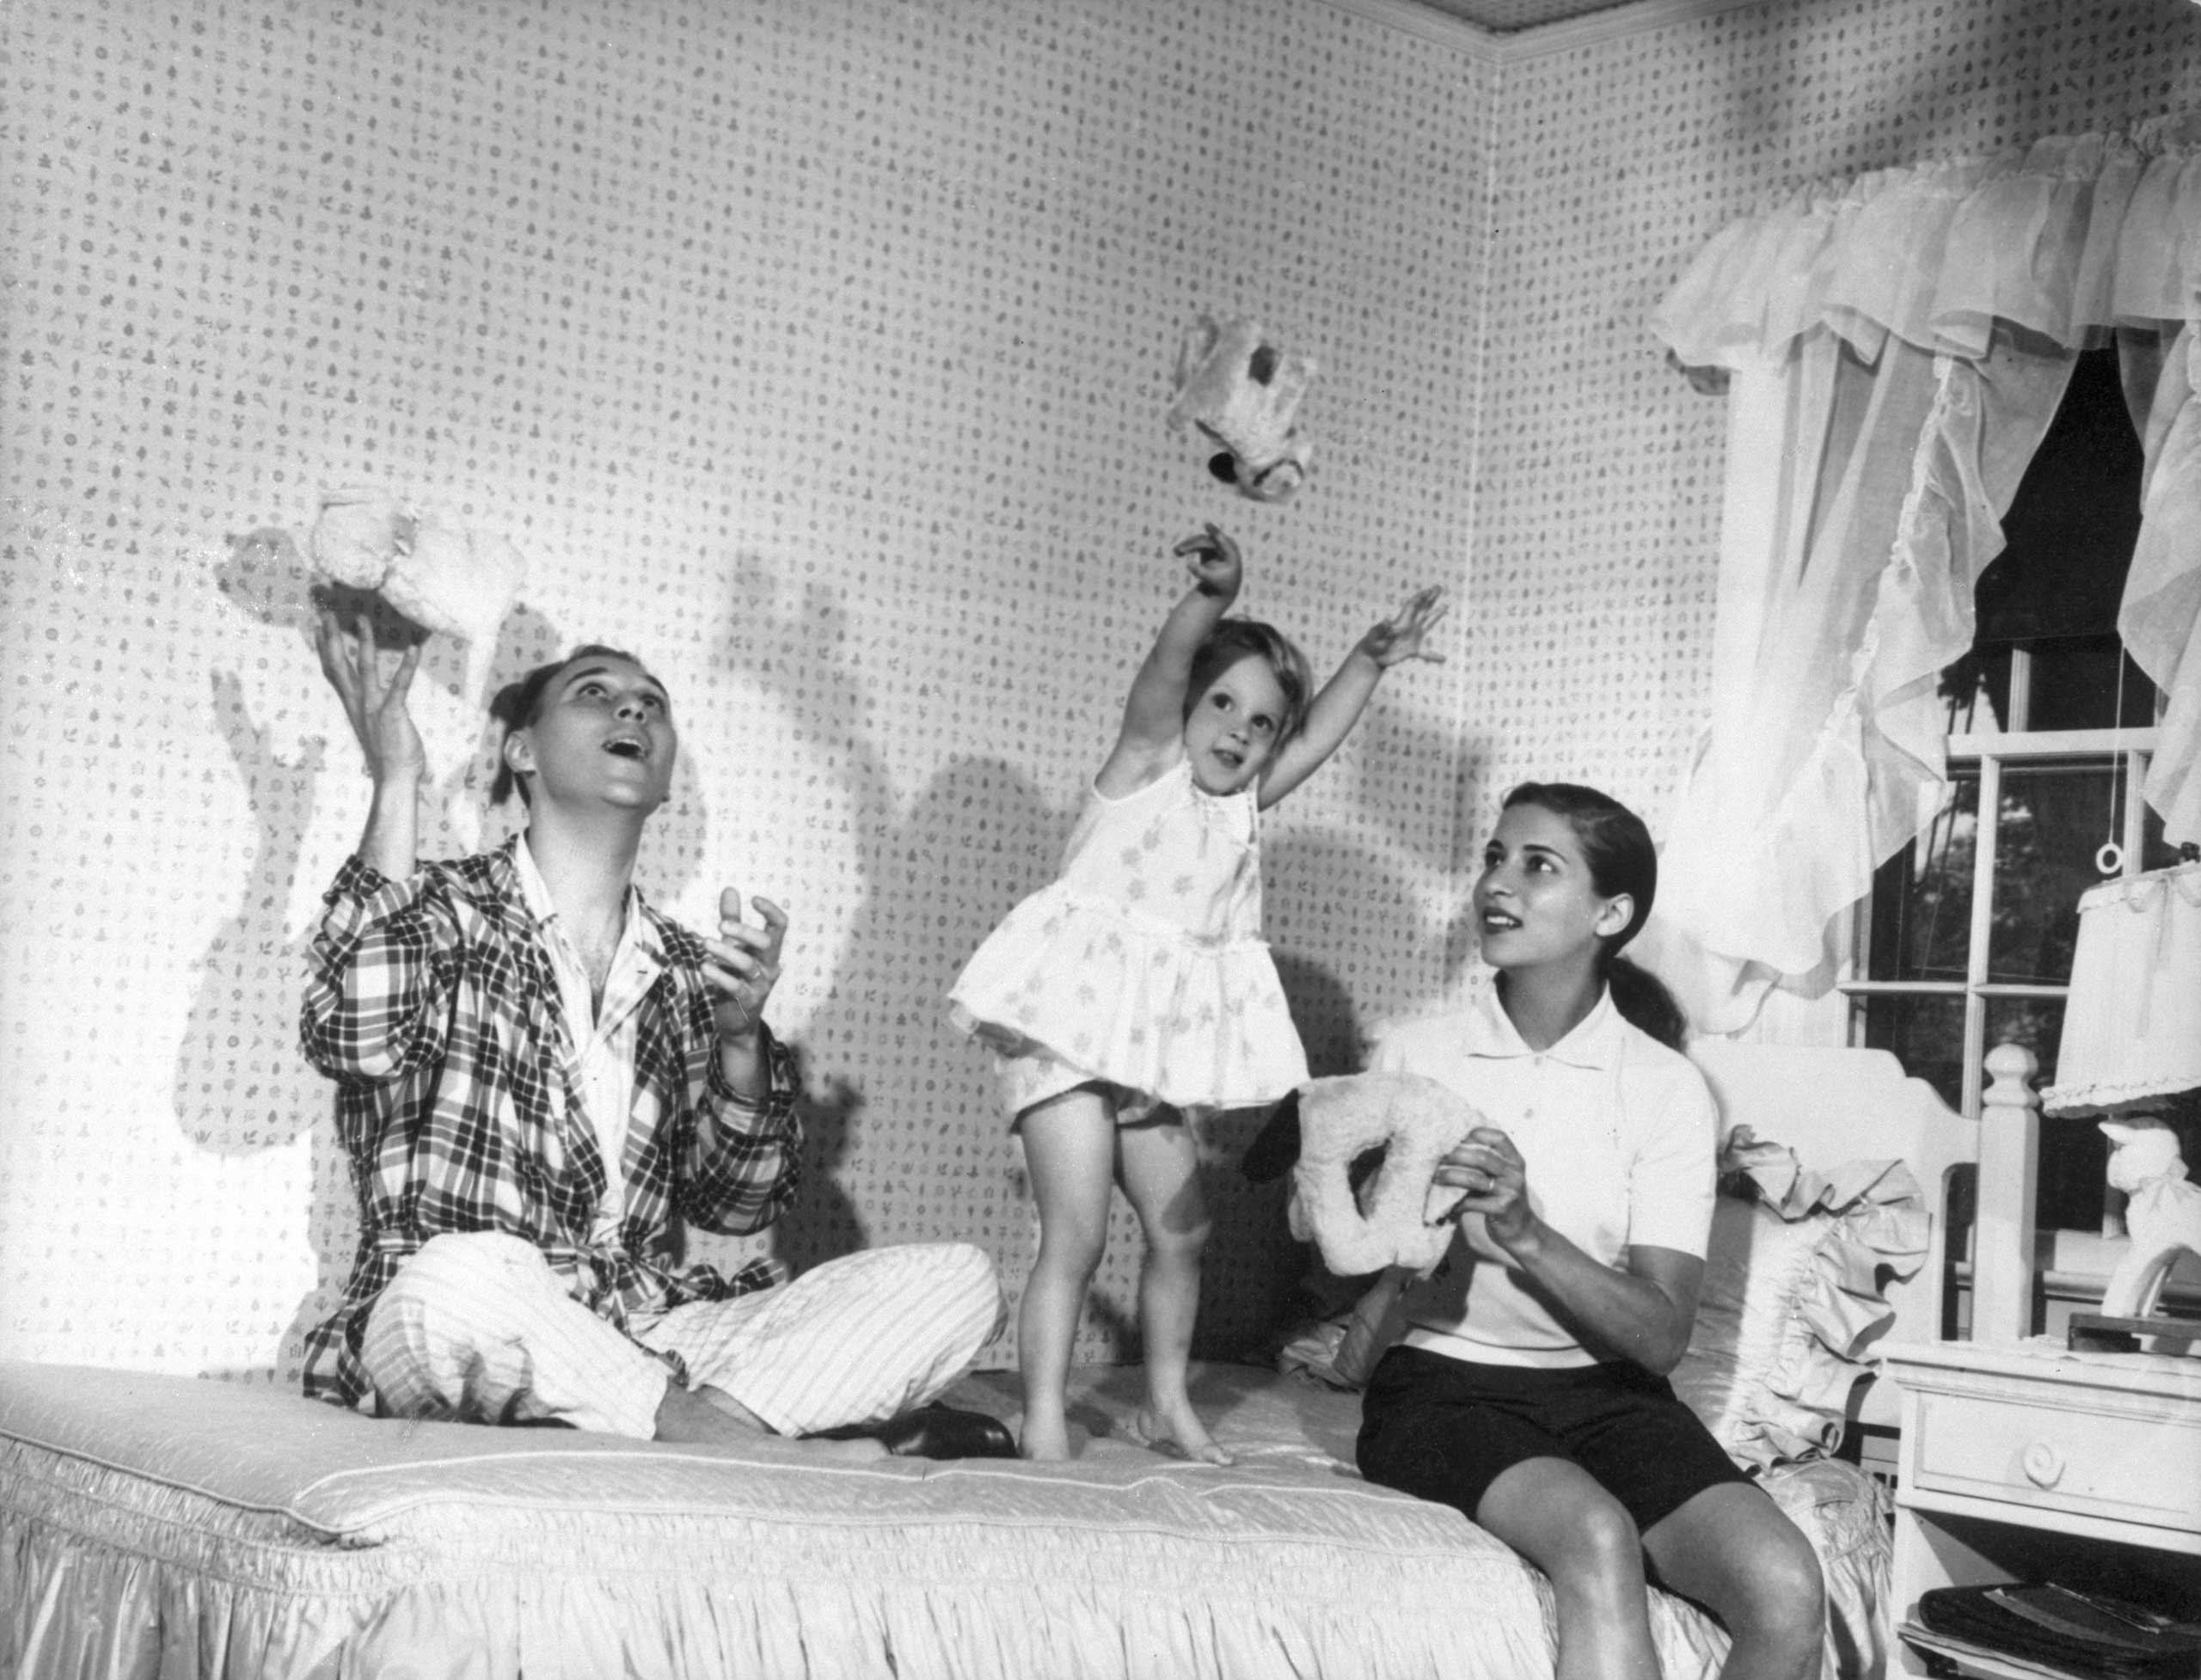 Summer 1958
                              Ruth Bader Ginsburg and Martin Ginsburg play with their three-year old daughter, Jane, in her bedroom at Martin's parents' home in Rockville Centre, N.Y